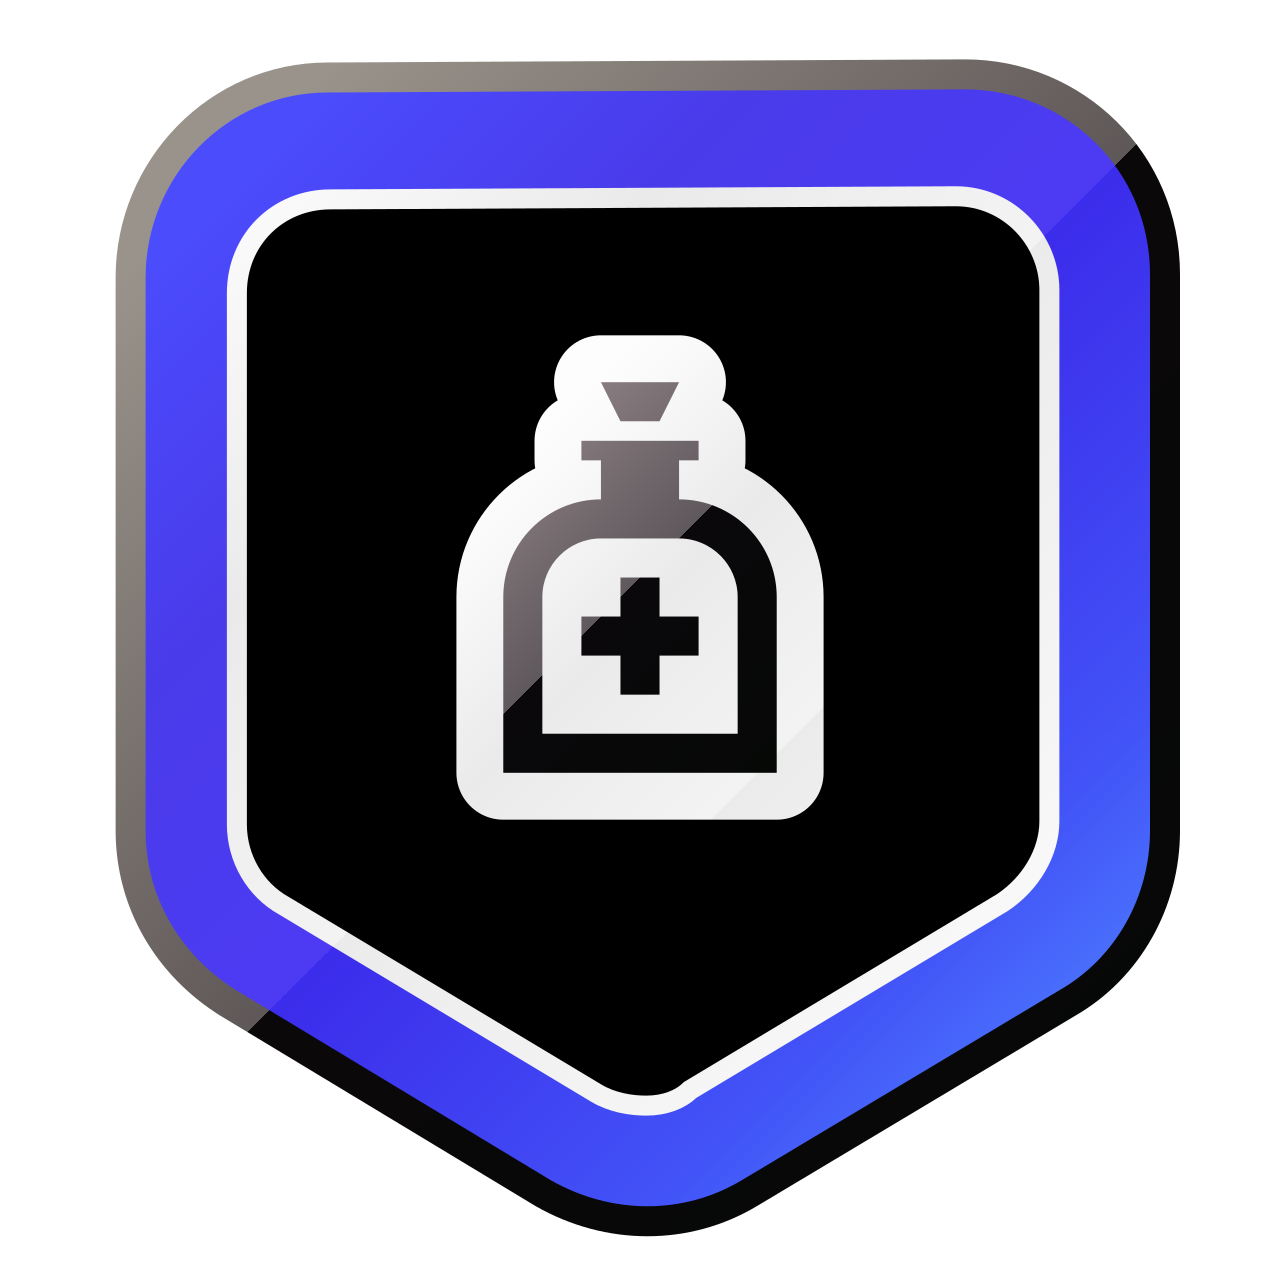 Health Systems Engineering course badge icon